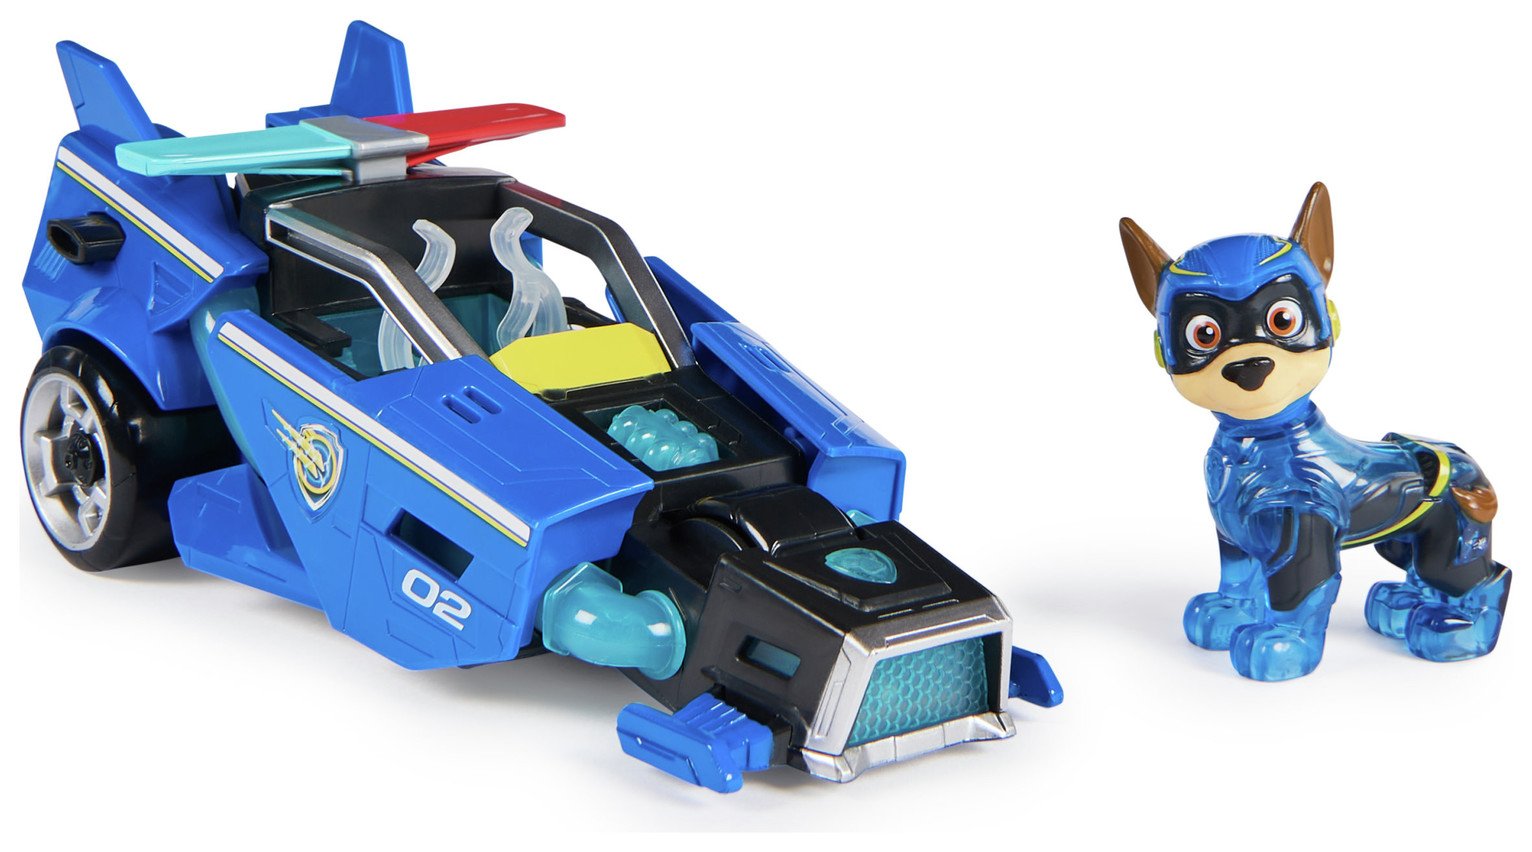 PAW Patrol Mighty Movie Chase Vehicle 